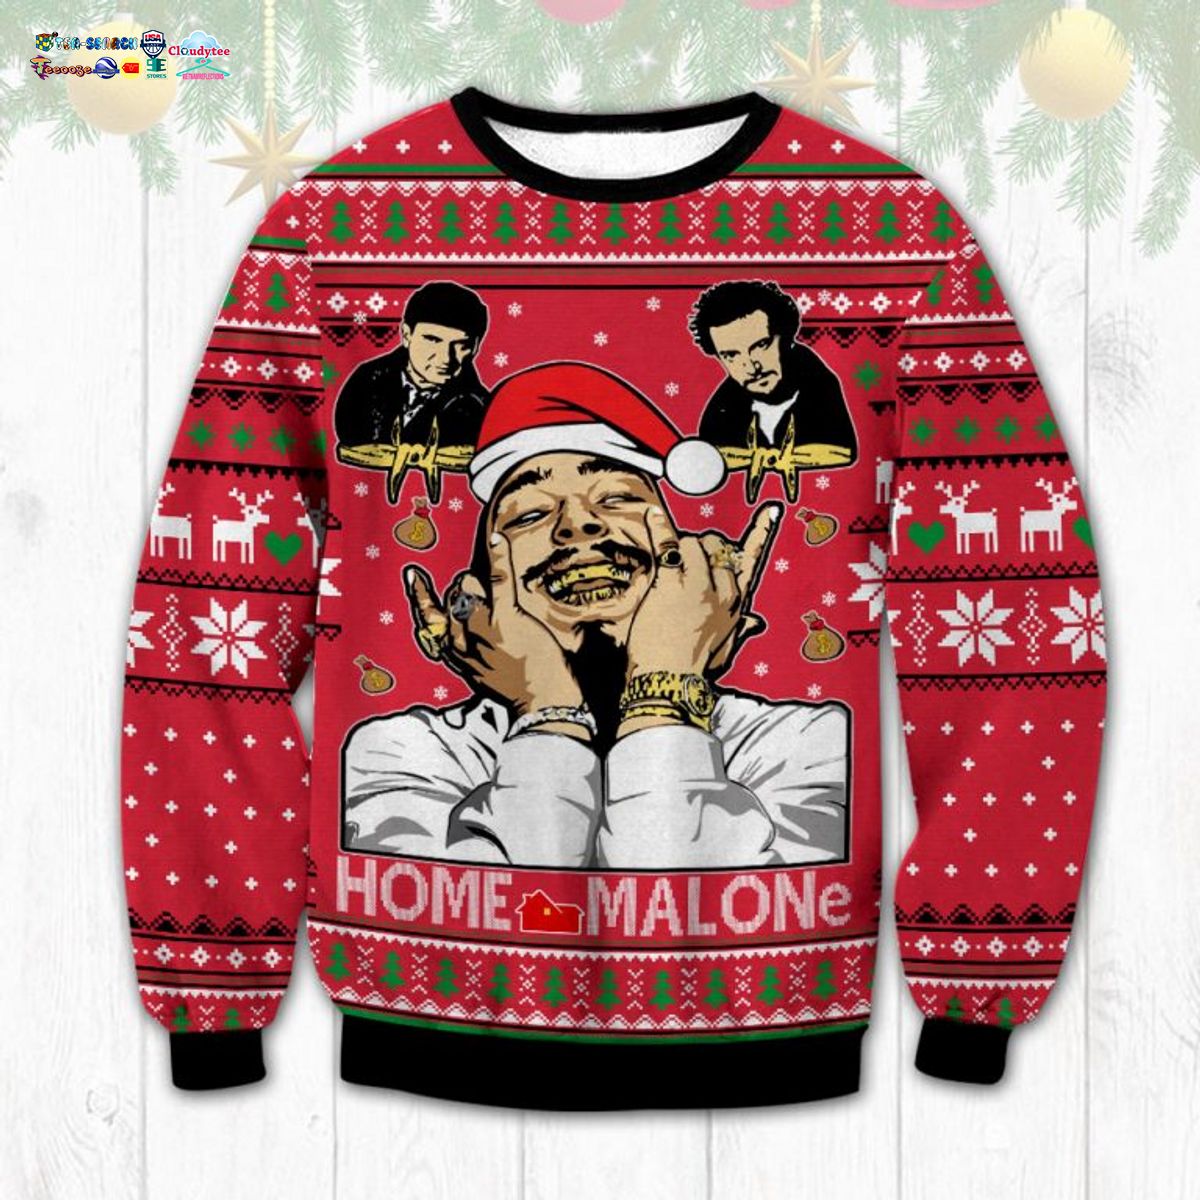 Home Alone Post Malone Ugly Christmas Sweater